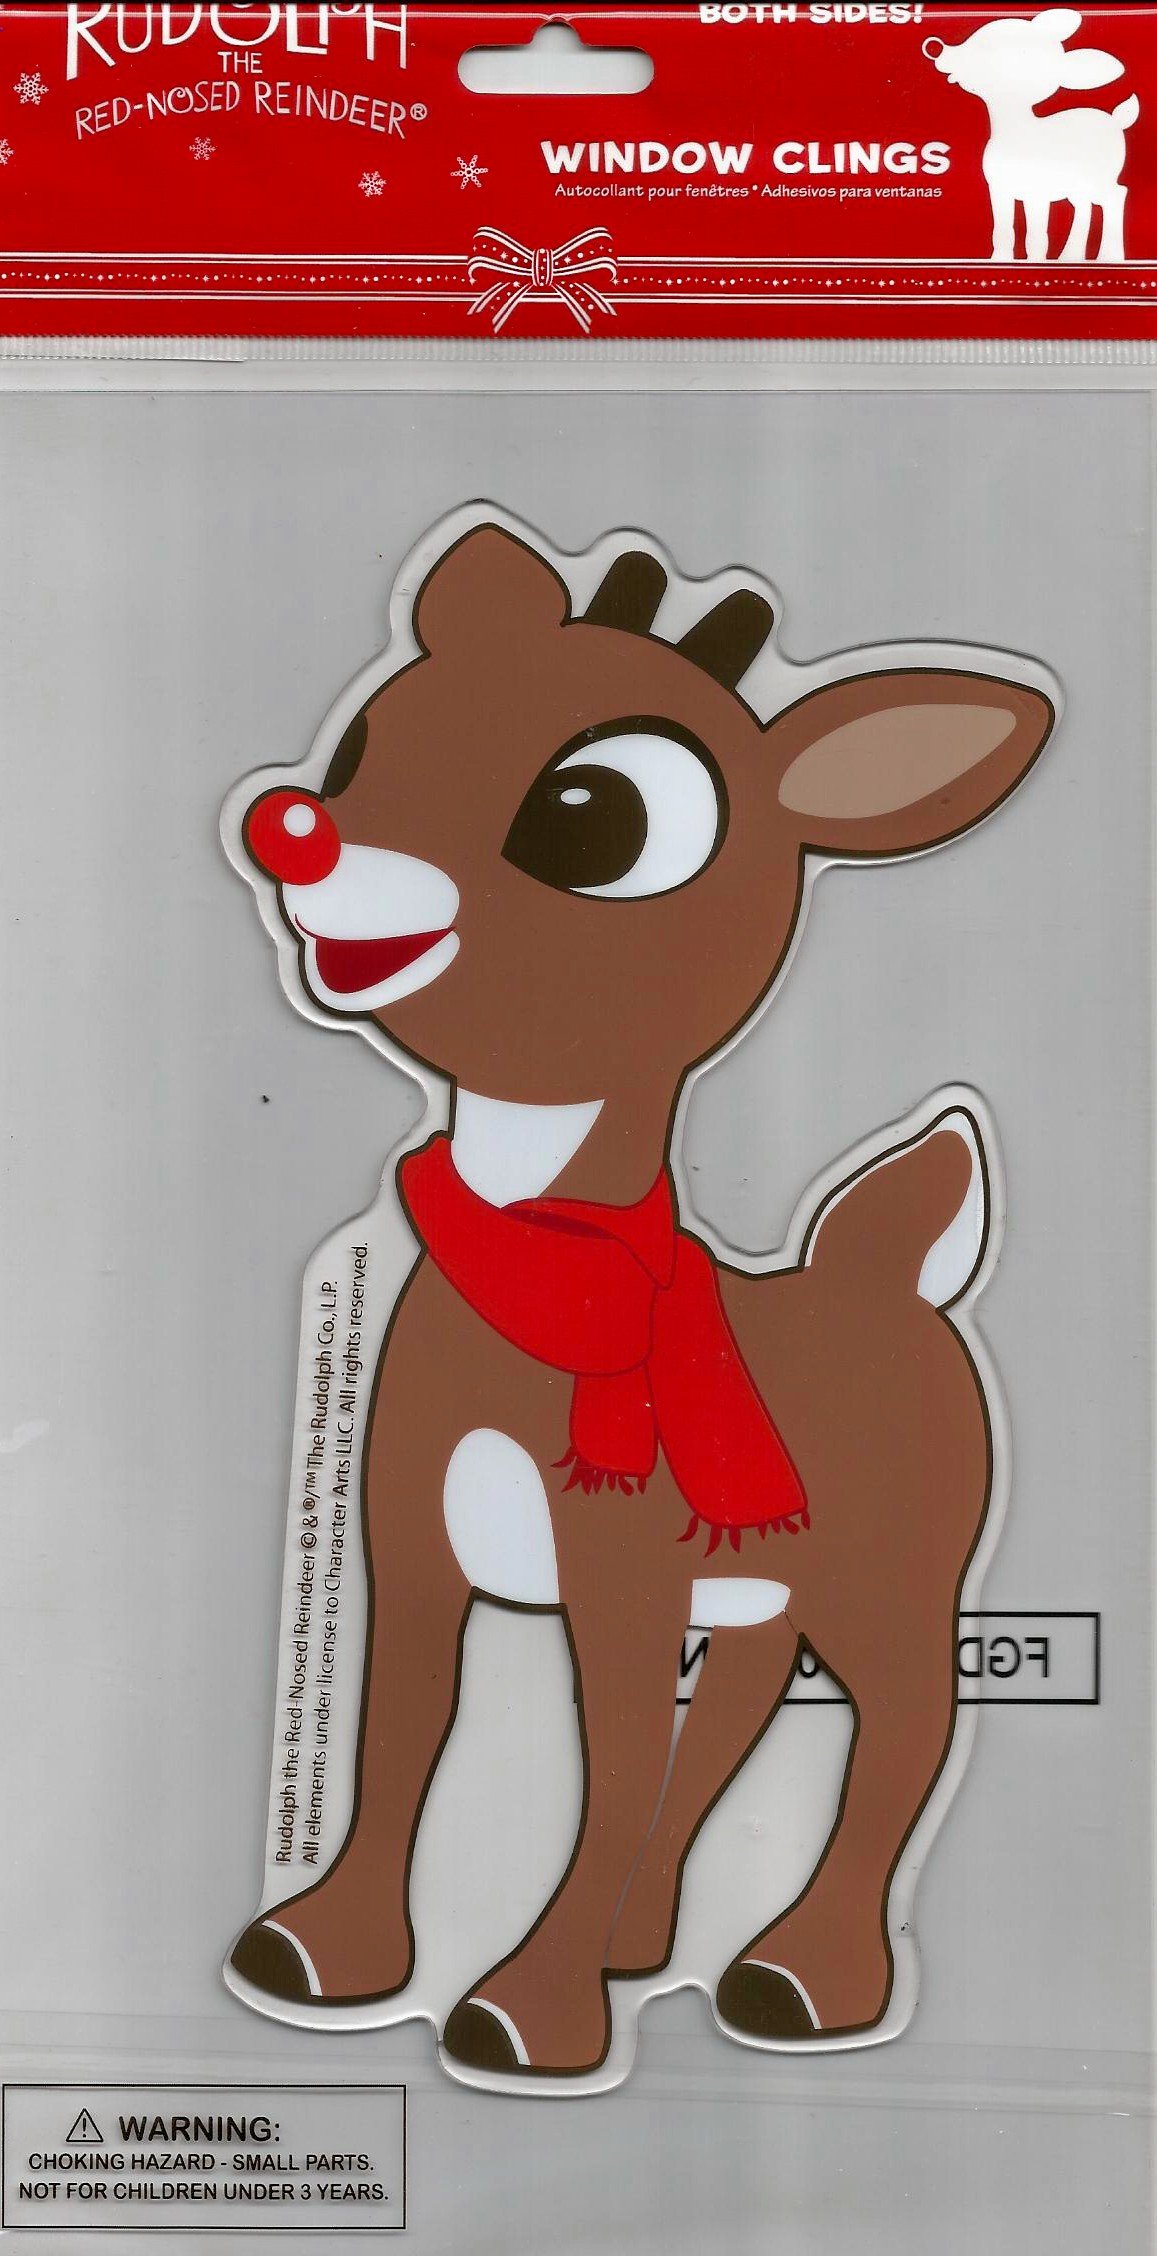 Productworks Rudolph the Red Nosed Reindeer Christmas Jelz Window Cling